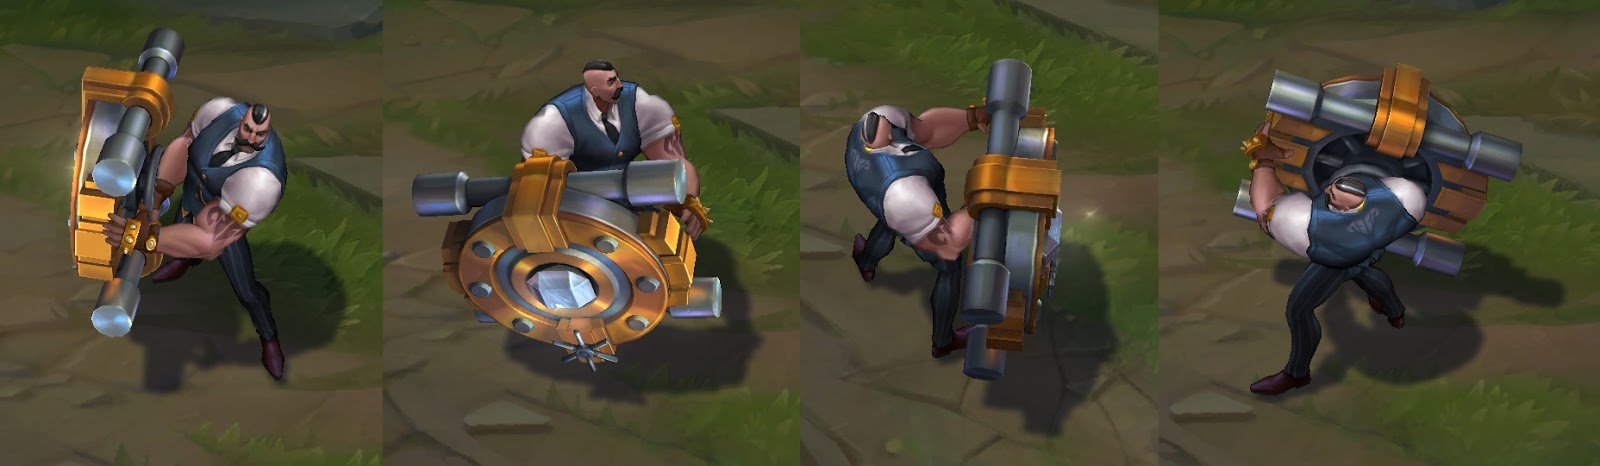 mafia braum skin for league of legends ingame picture